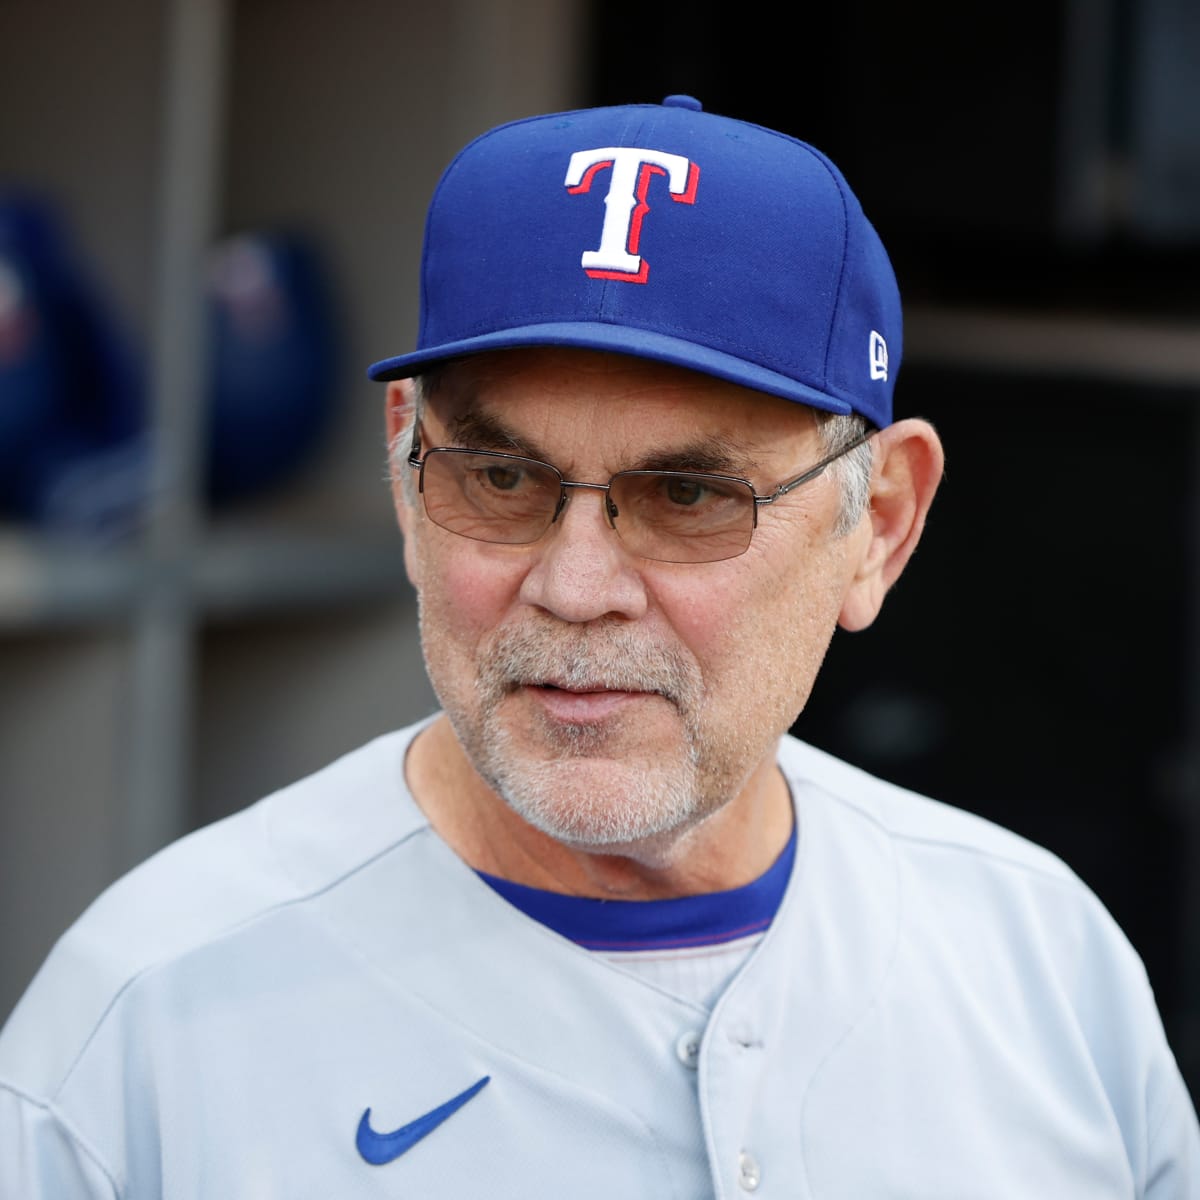 Bruce Bochy gained fresh perspective on baseball before taking Rangers job  National News - Bally Sports